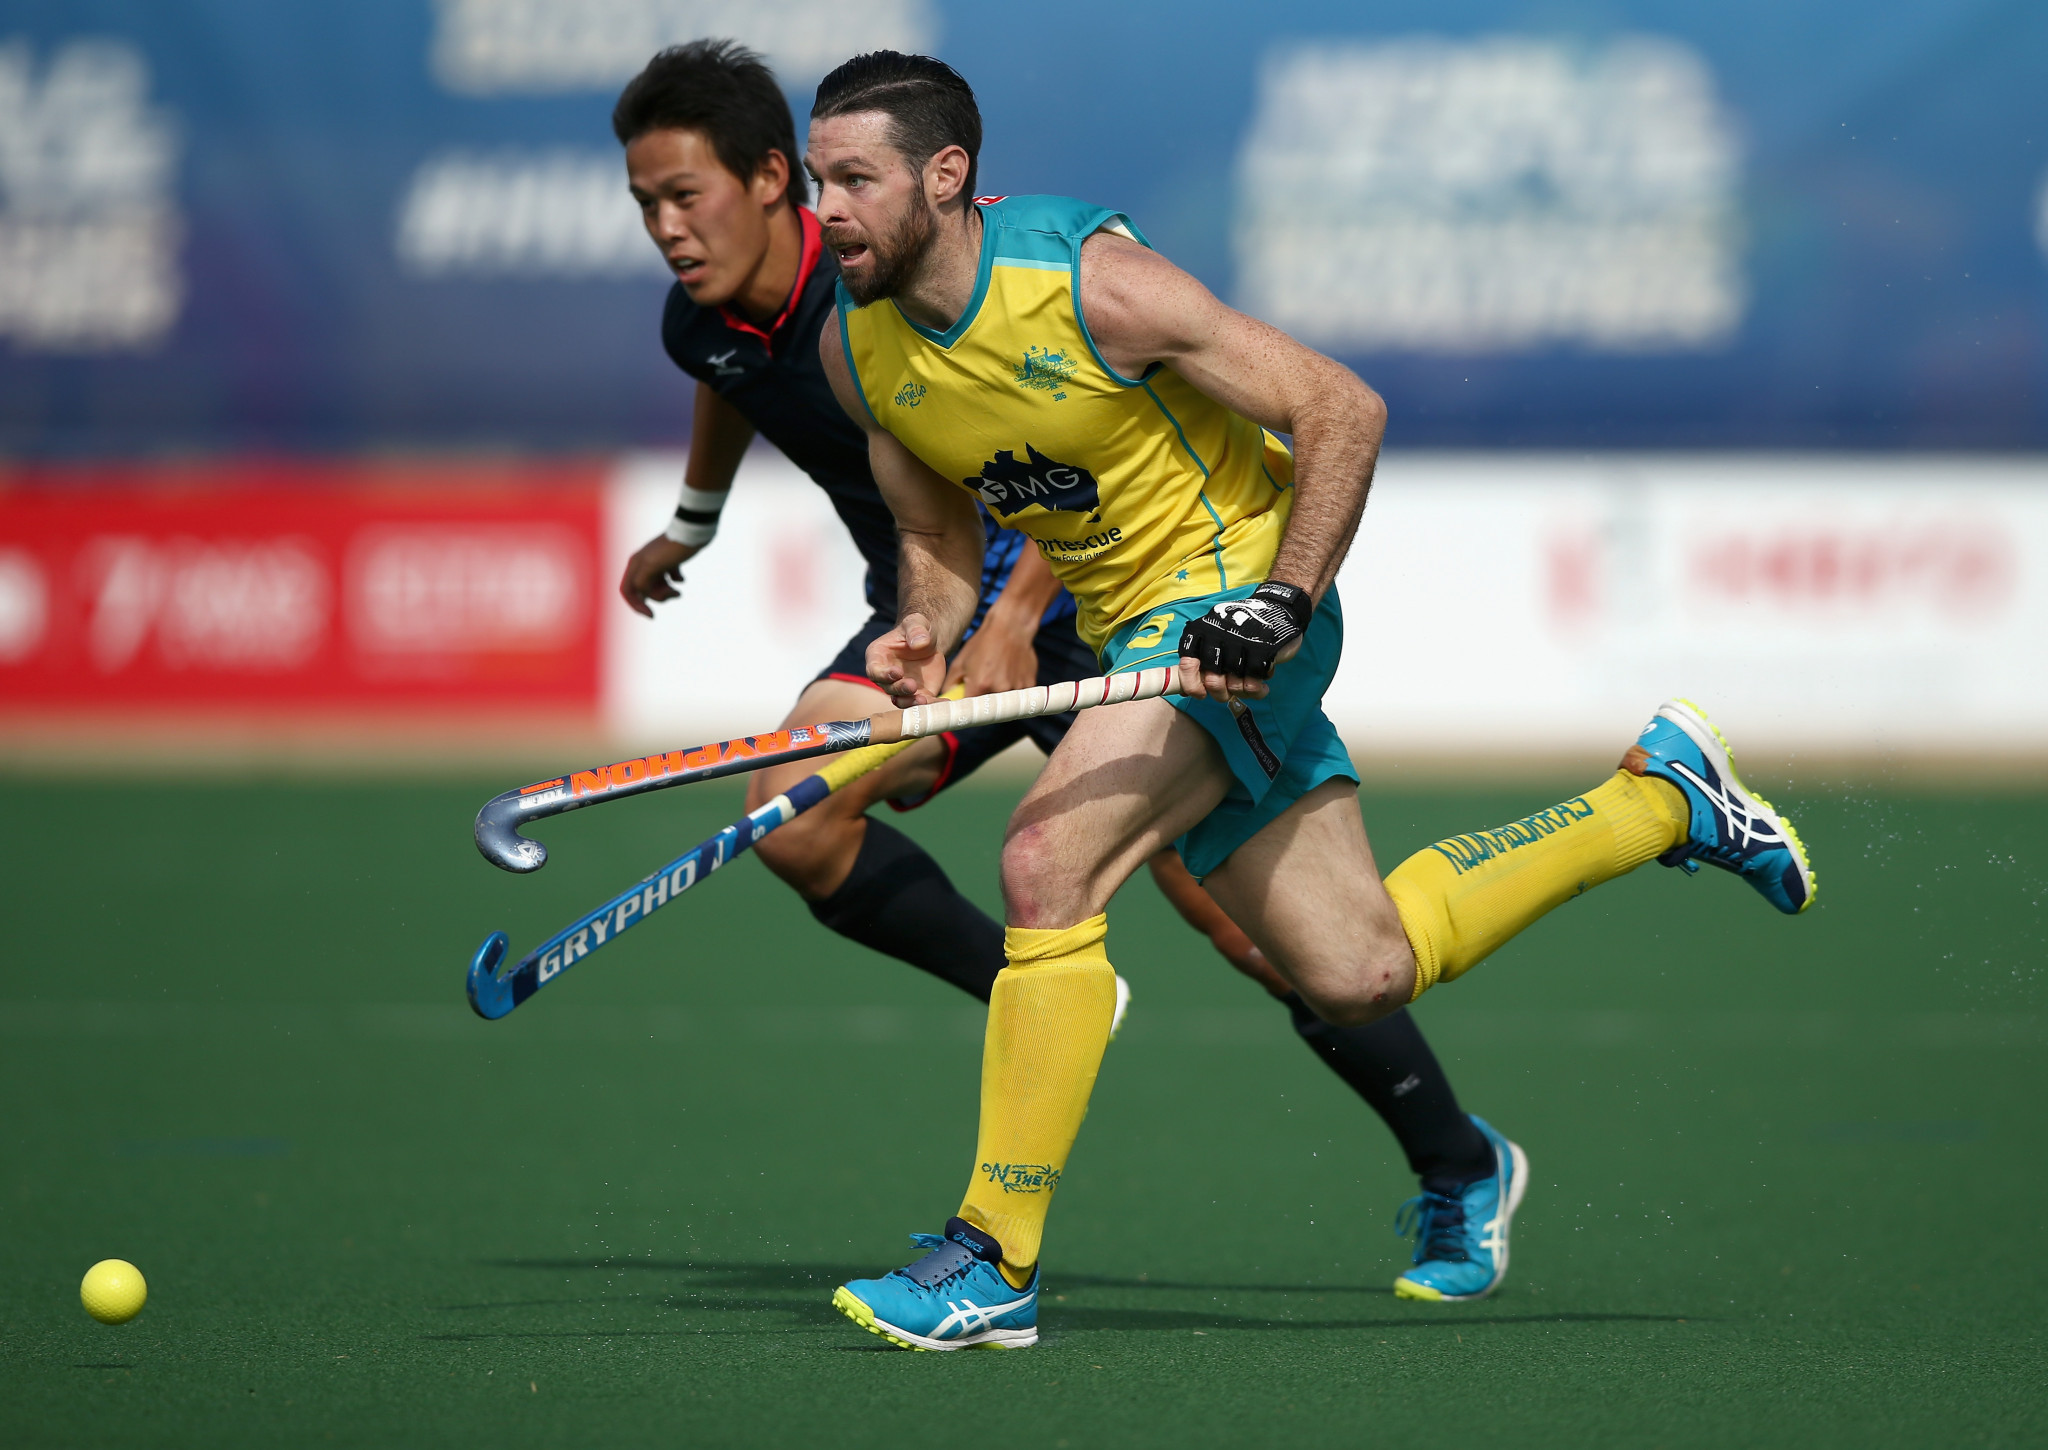 Japan and Australia will open the hockey tournament at Tokyo 2020 ©Getty Images